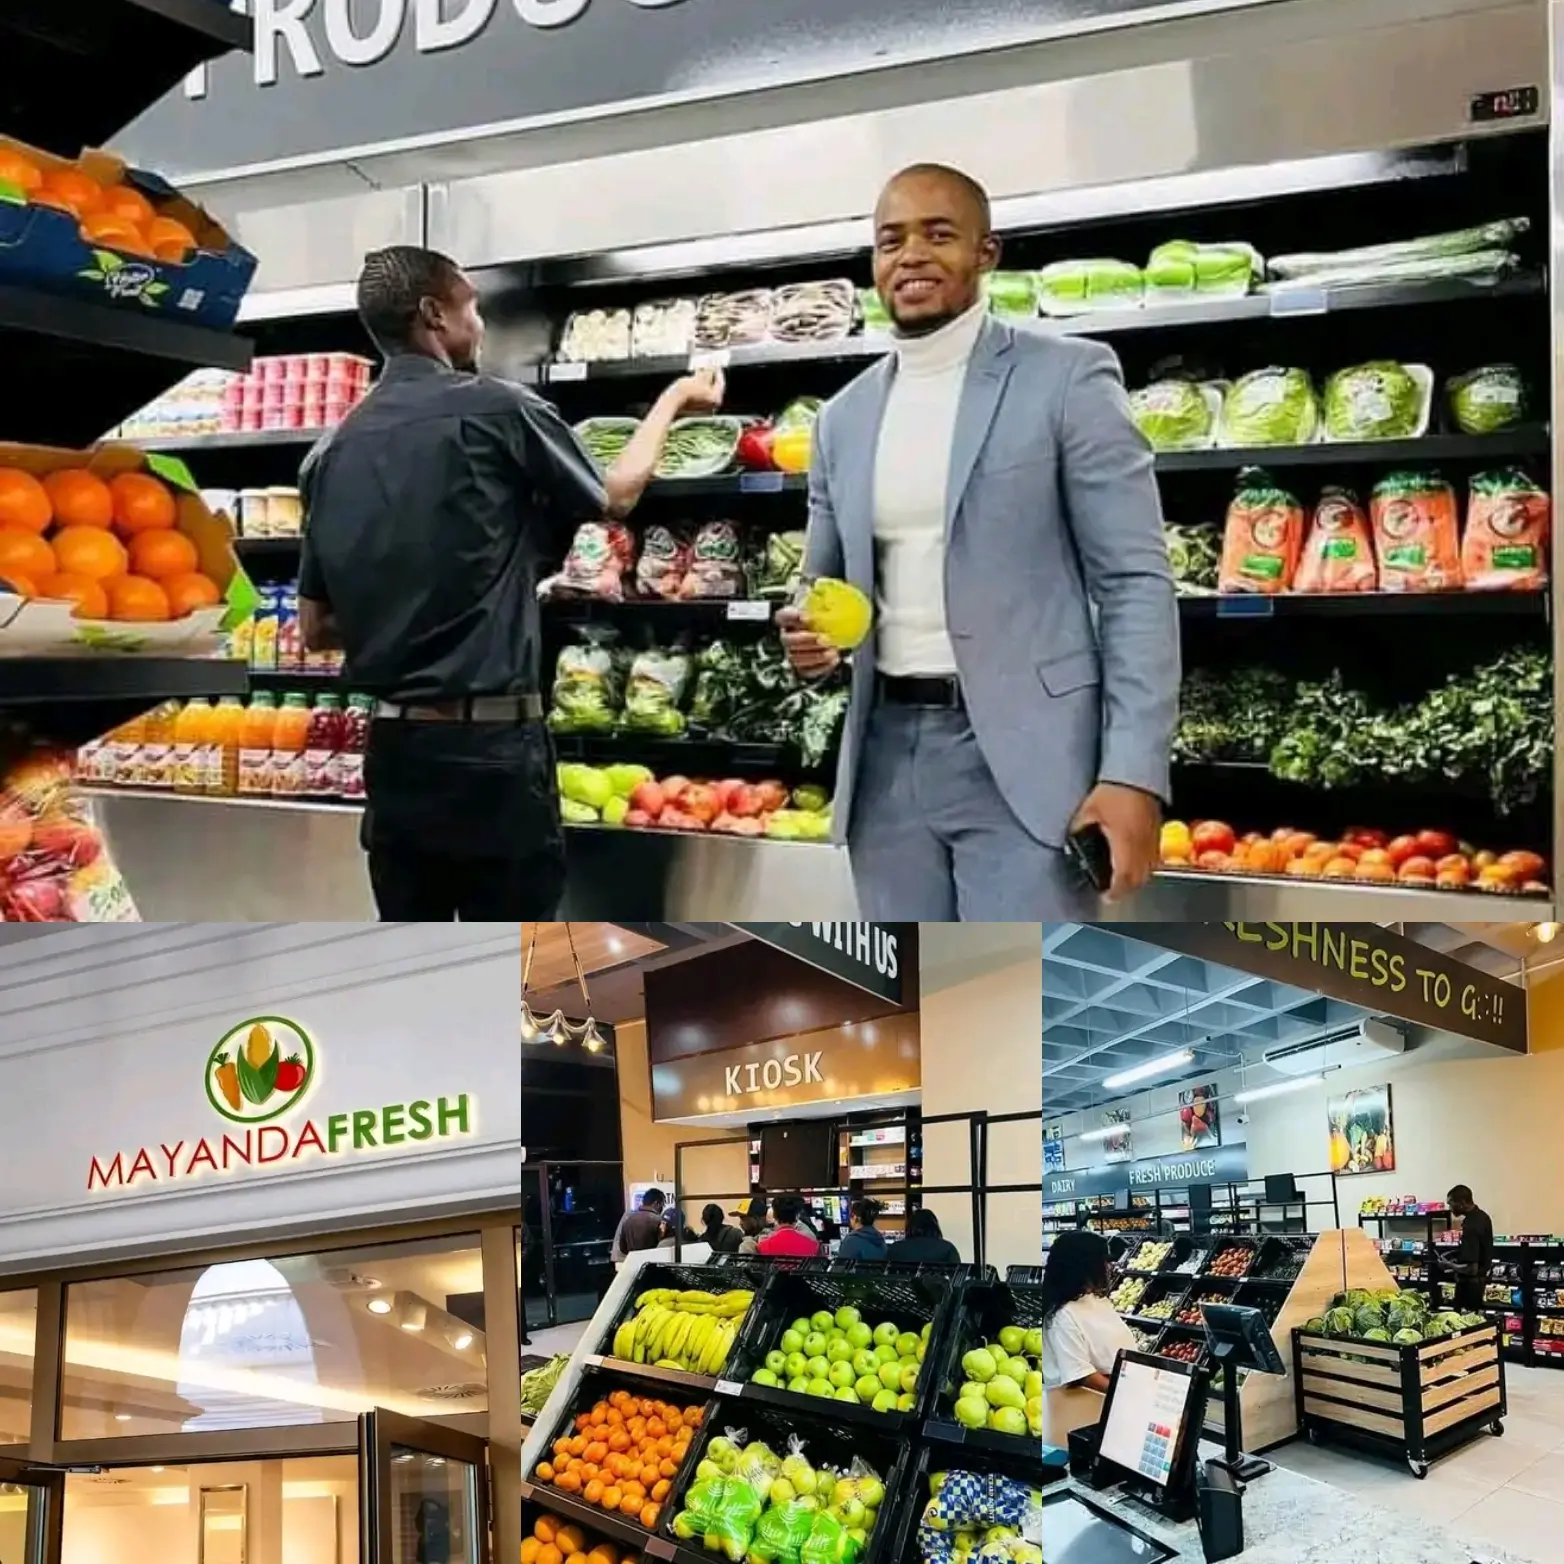 FROM BEING A CLEANER TO OWNING A FRESH PRODUCE SUPERMARKET